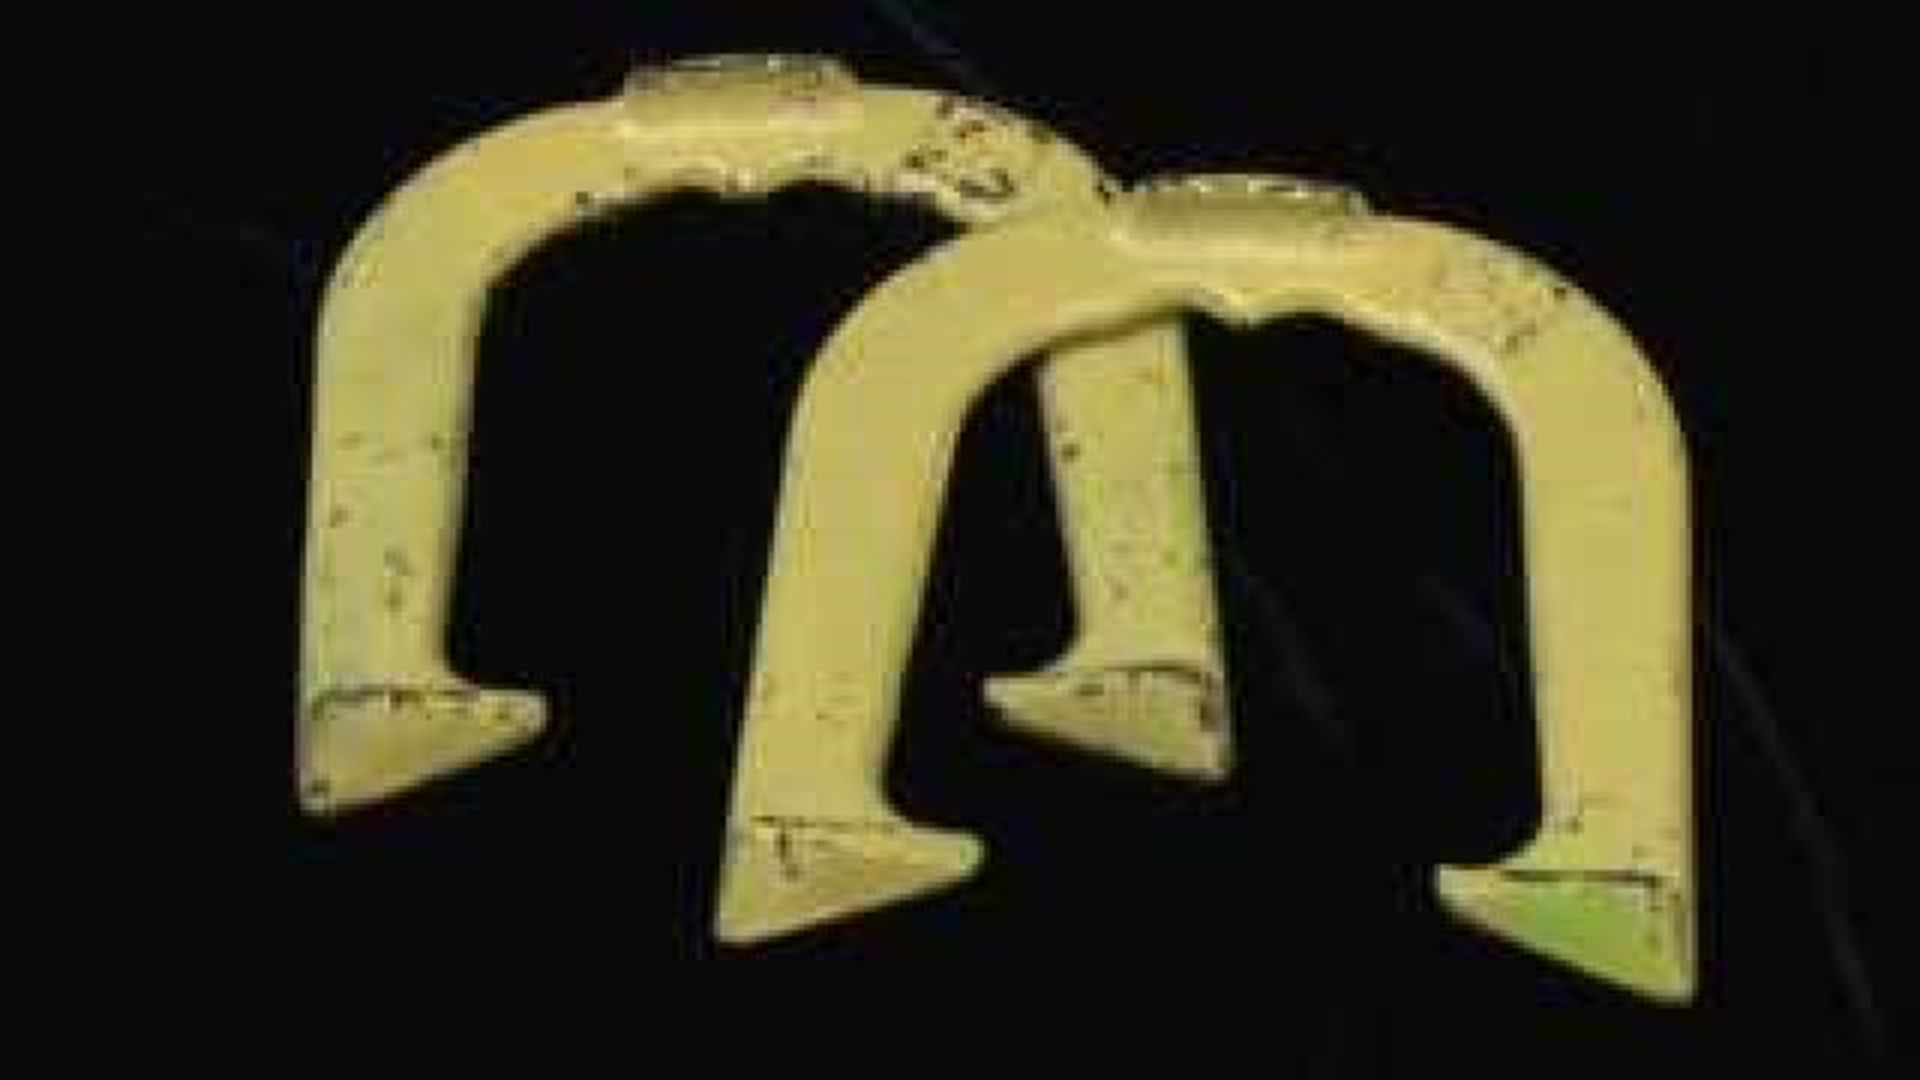 Search for clues of mystery John Deere horseshoes